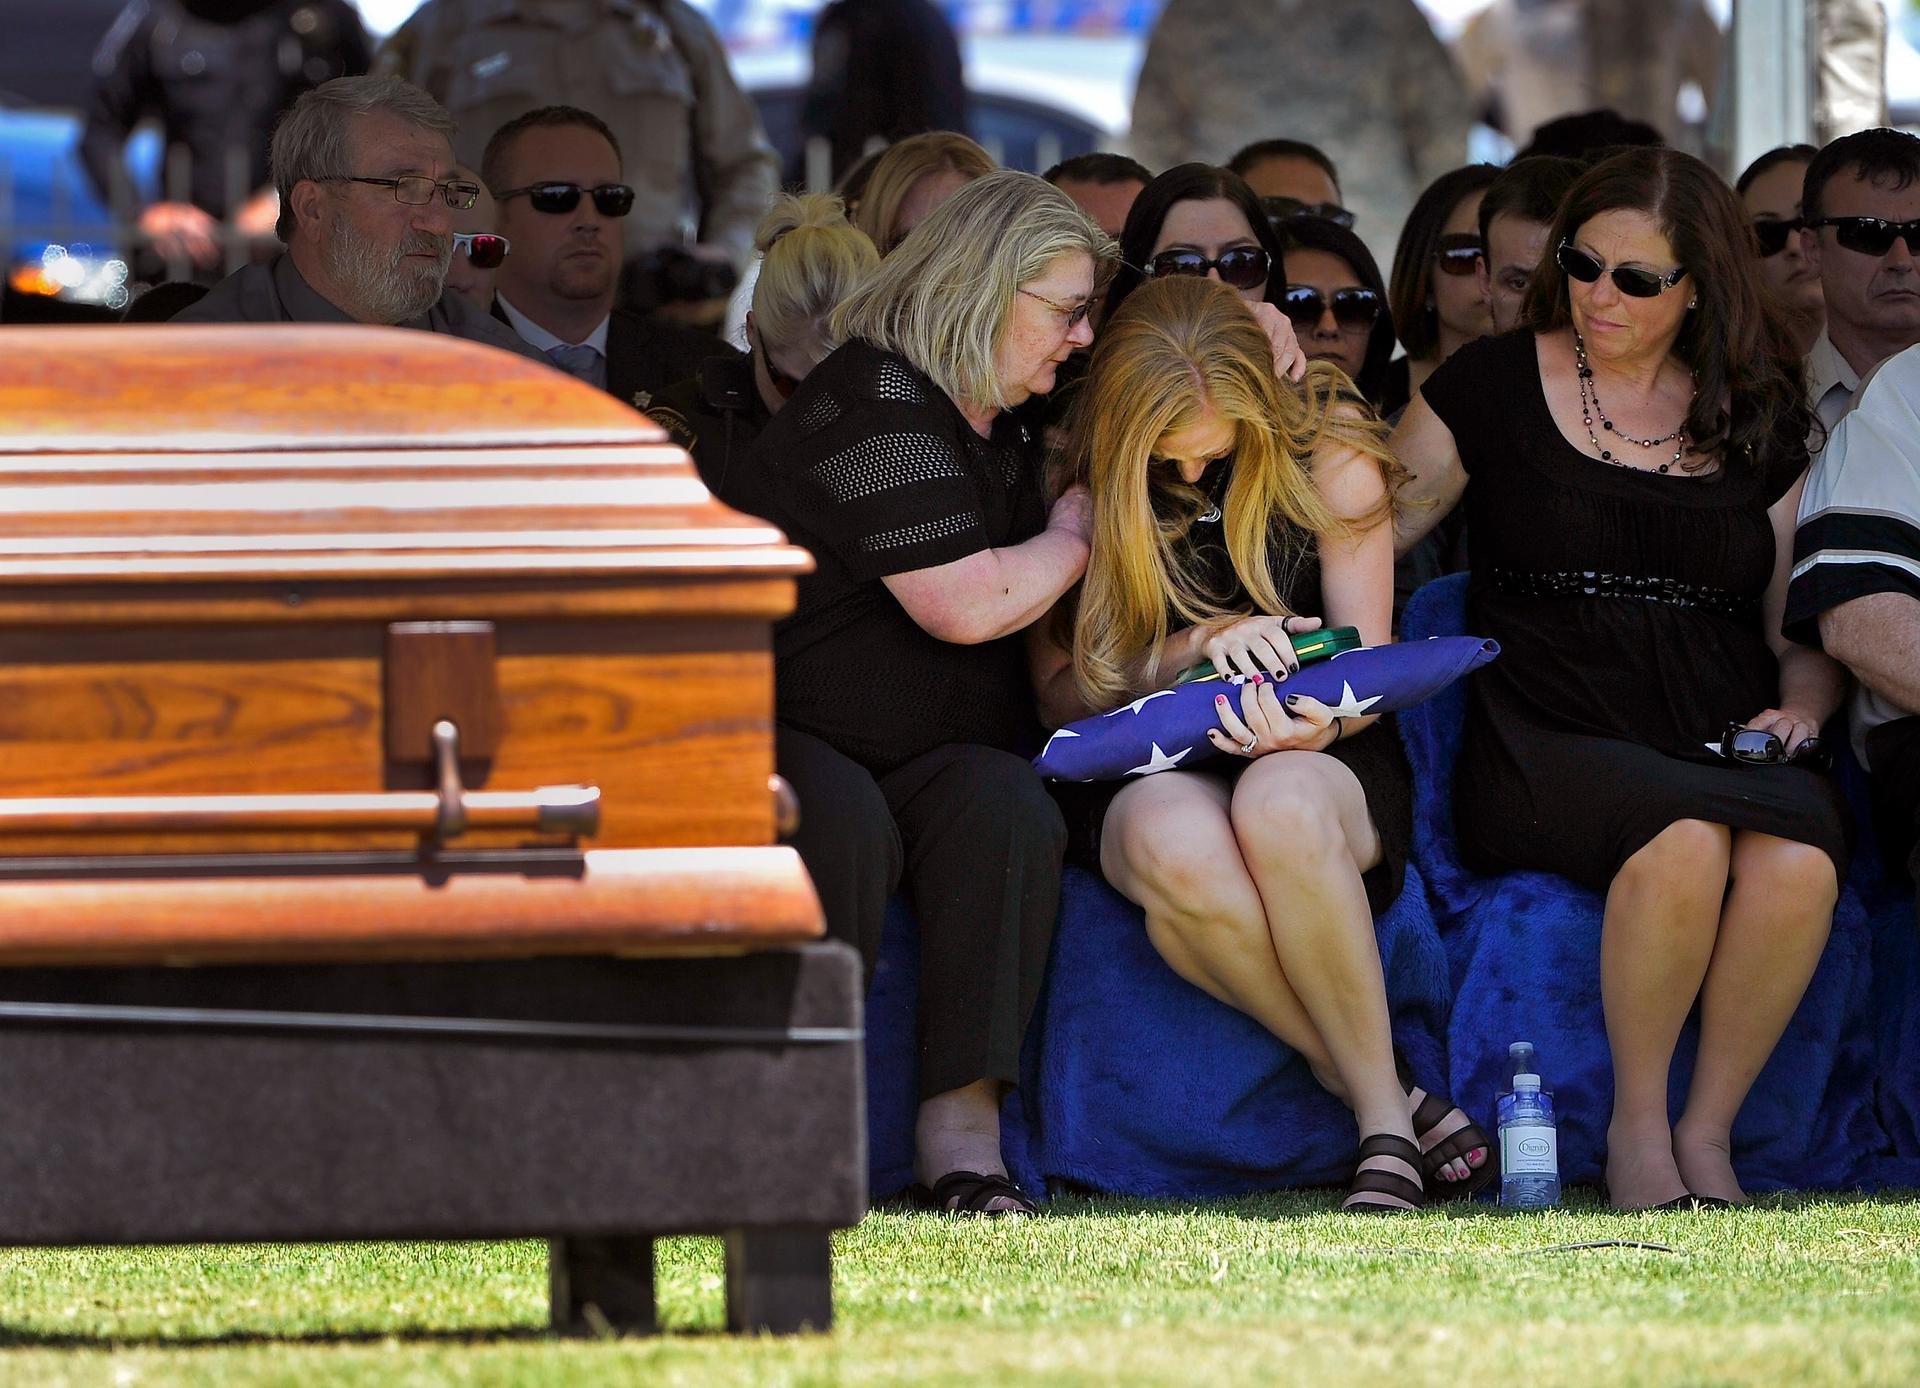 Andrea Soldo is consoled by family members after receiving a flag during the funeral services for her husband, Las Vegas police officer Igor Soldo, in Las Vegas, Nevada, on June 12, 2014.